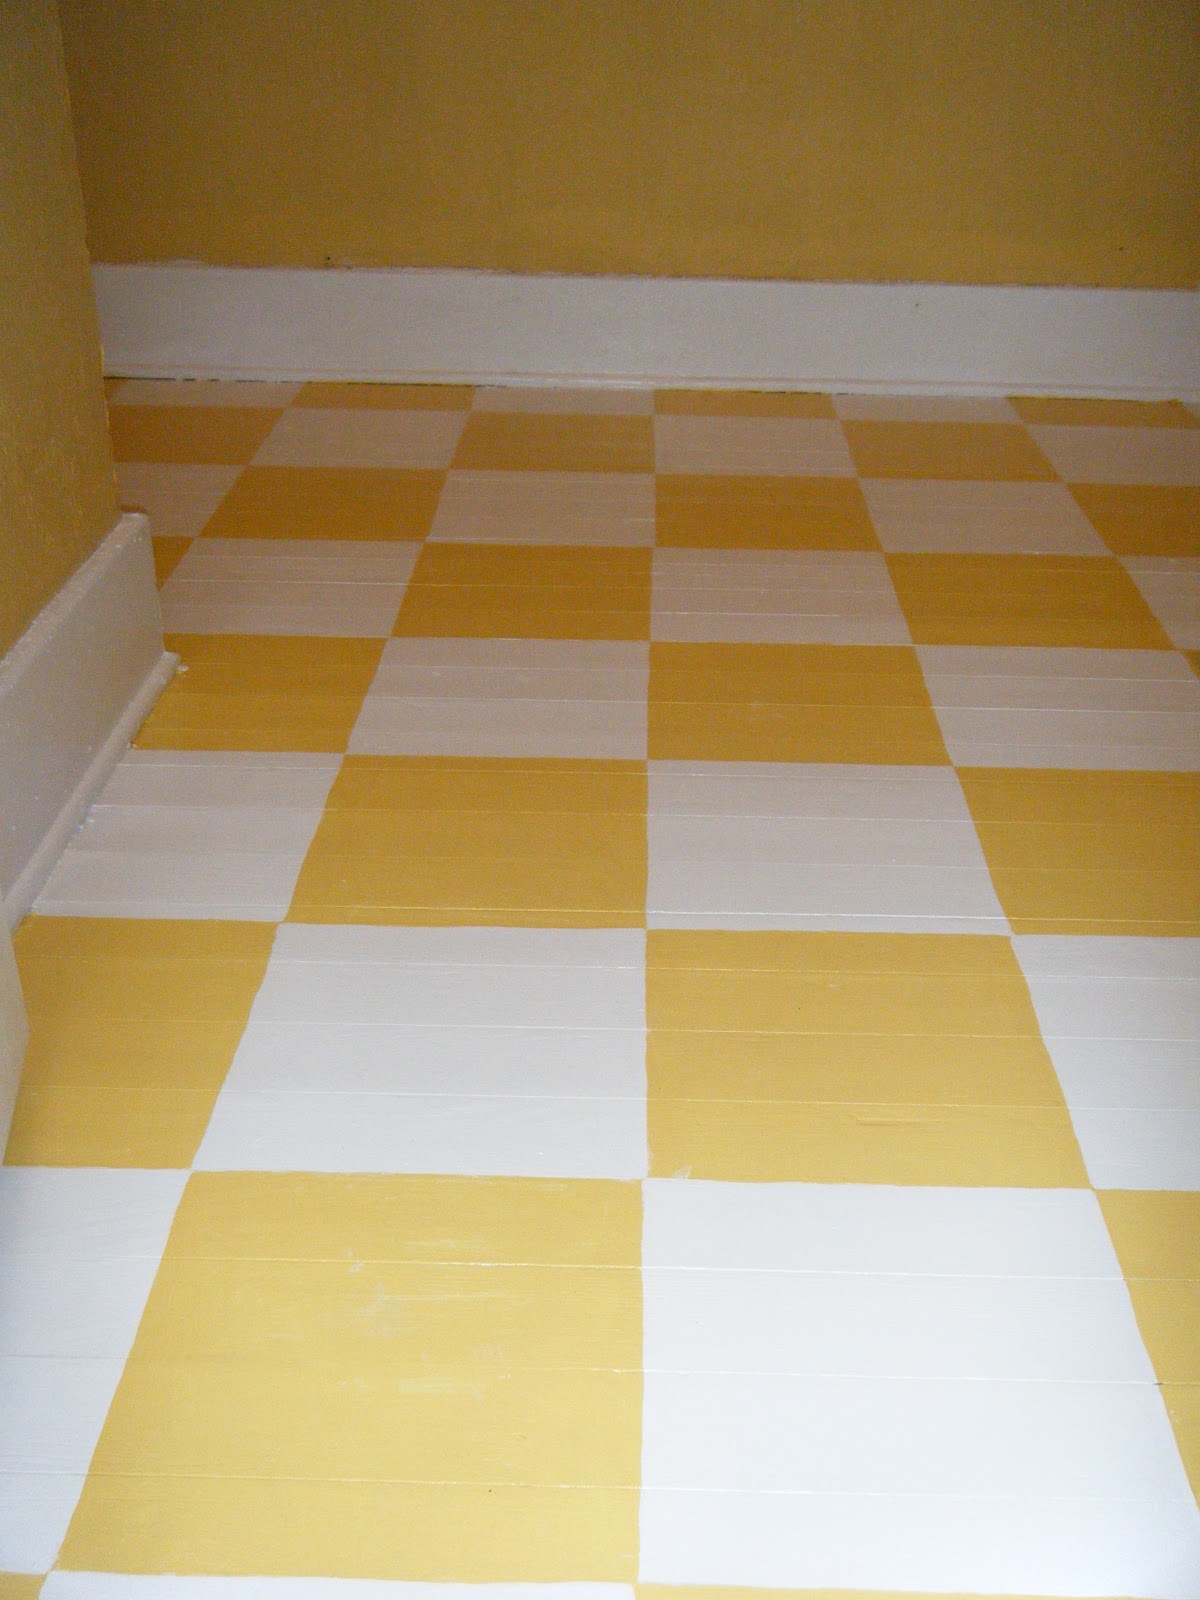 Creativity in DIY: You Can Do It!: Paint a wood floor? Why not?